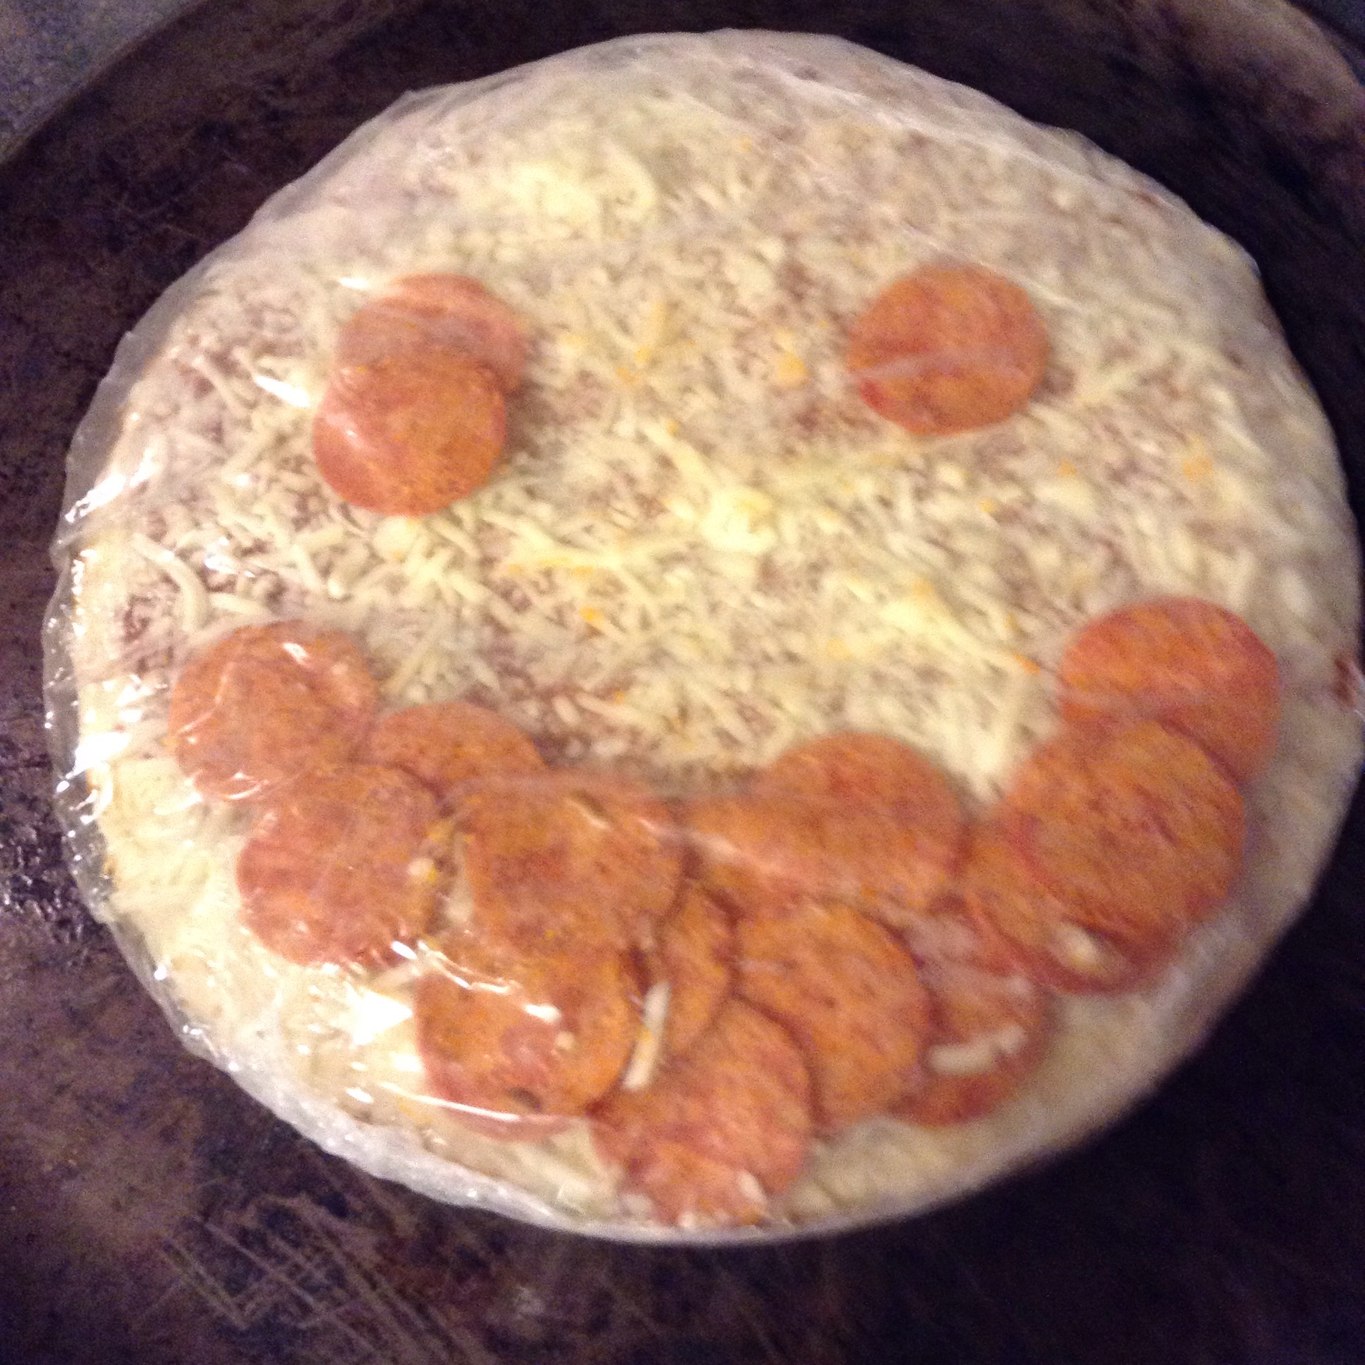 just opened this pizza & its smiling at me... now at you too - meme